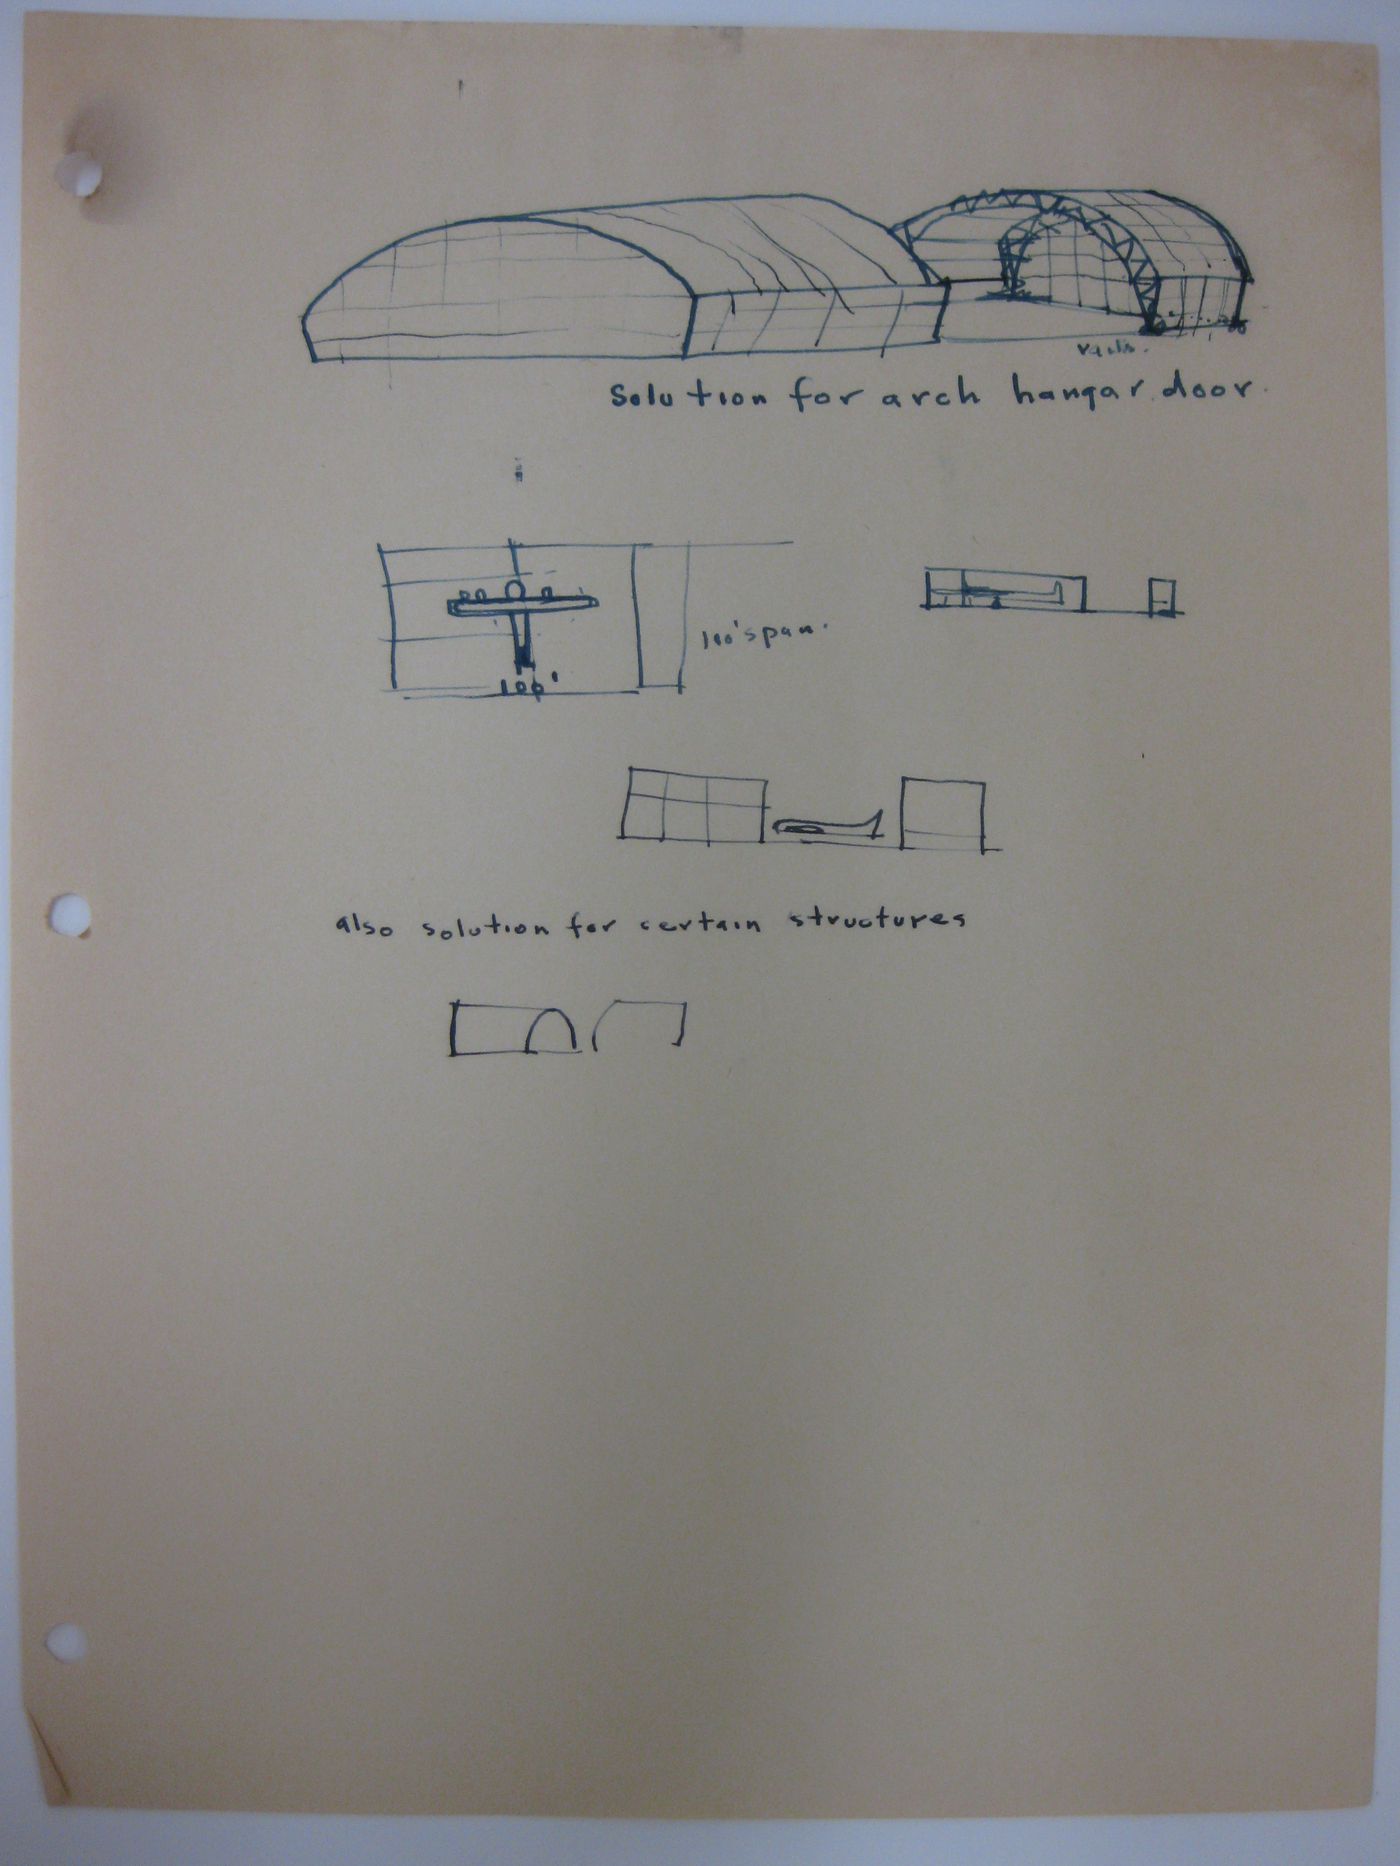 Sketches of solutions for arch hangar door and structures